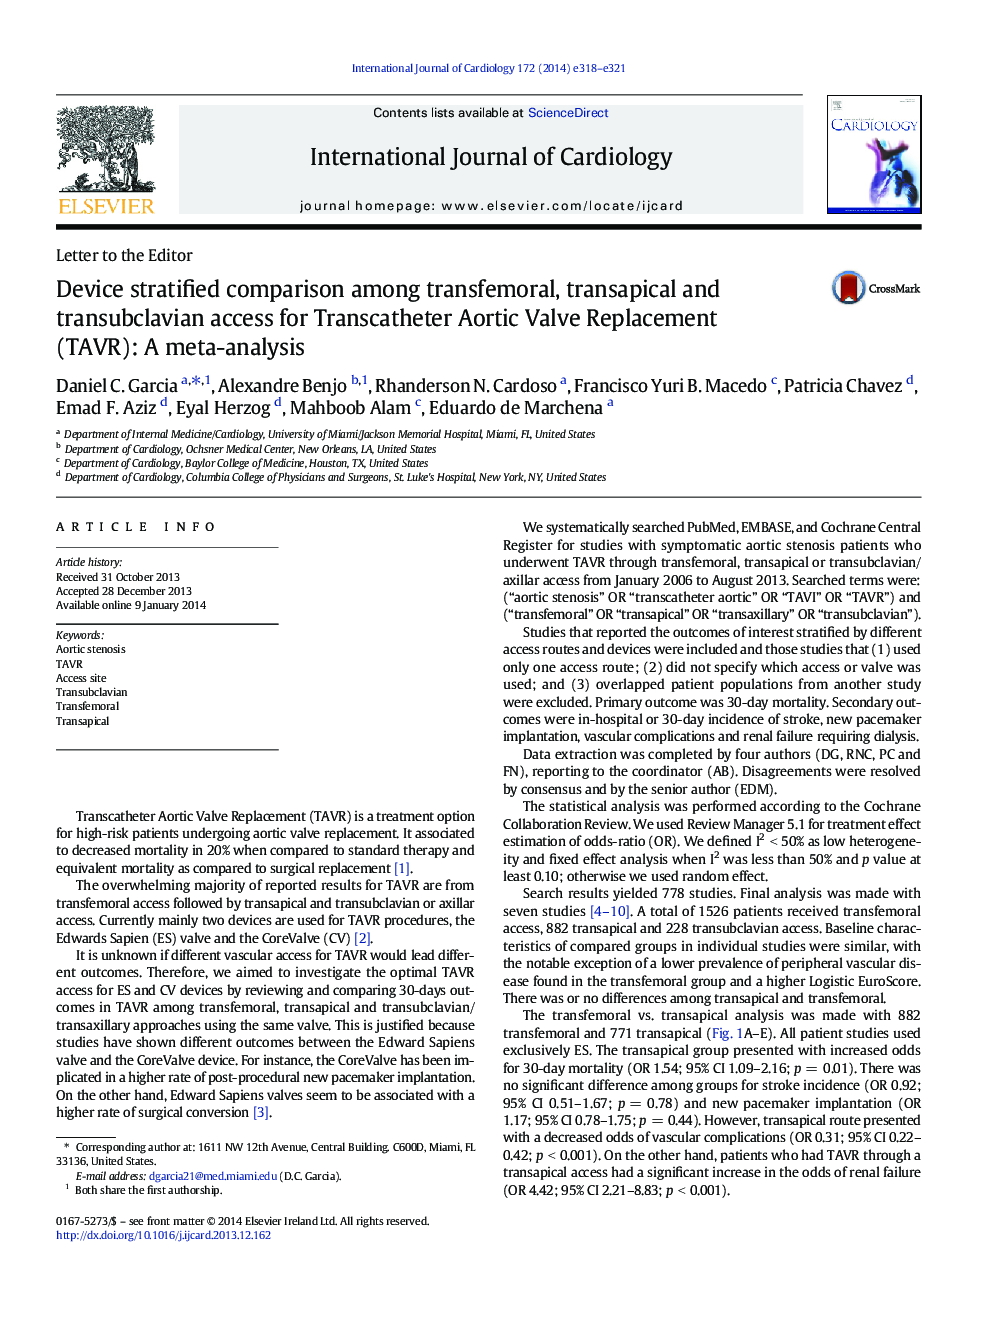 Device stratified comparison among transfemoral, transapical and transubclavian access for Transcatheter Aortic Valve Replacement (TAVR): A meta-analysis